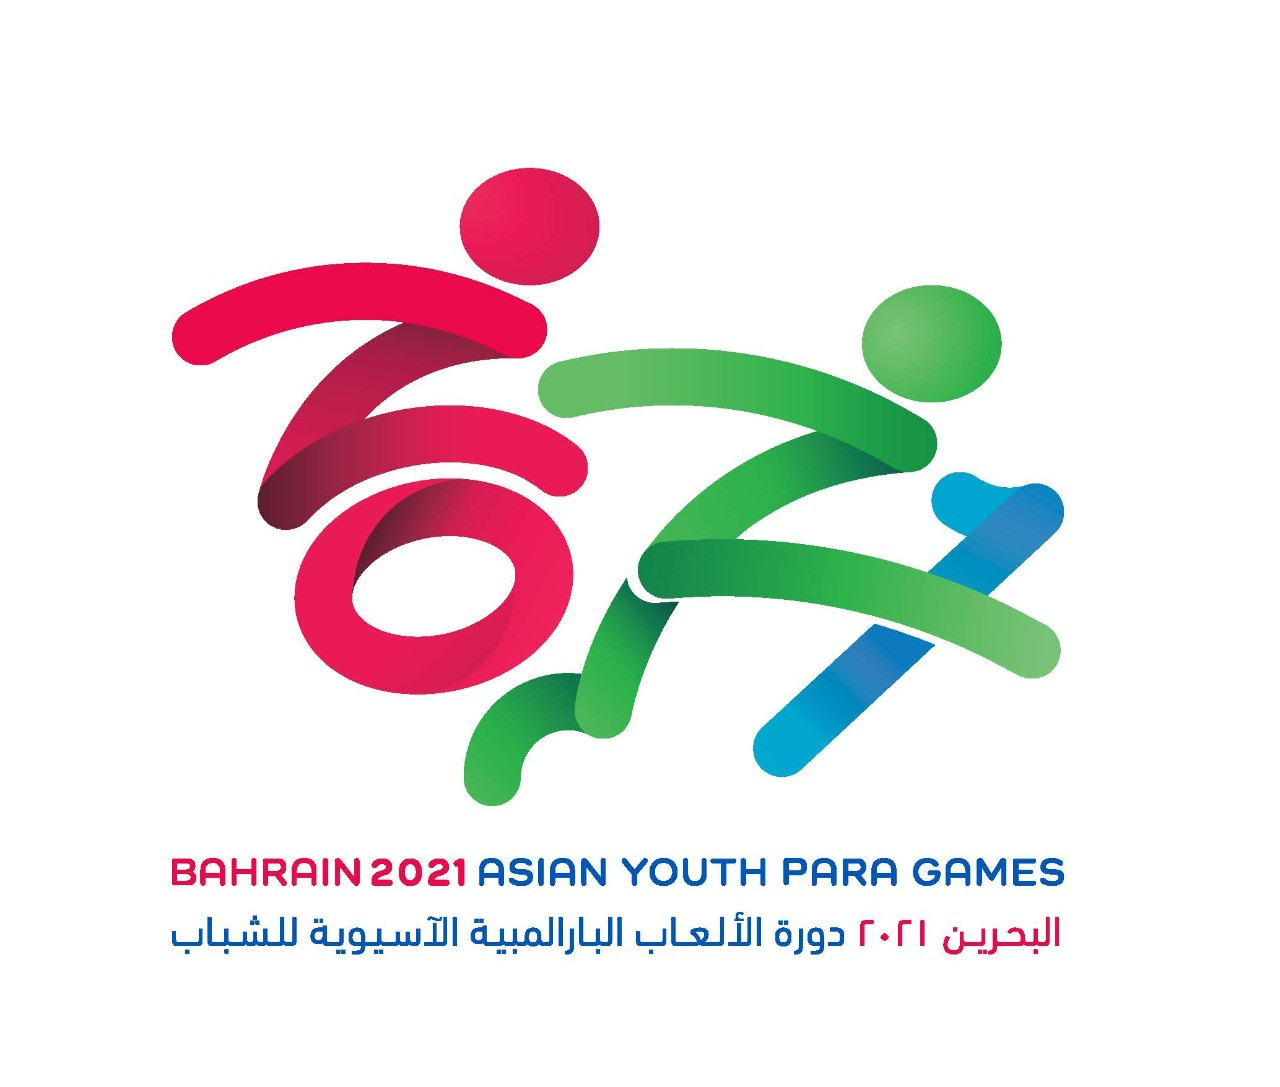 The Bahrain 2021 Asian Youth Para Games logo has been launched ©Bahrain 2021